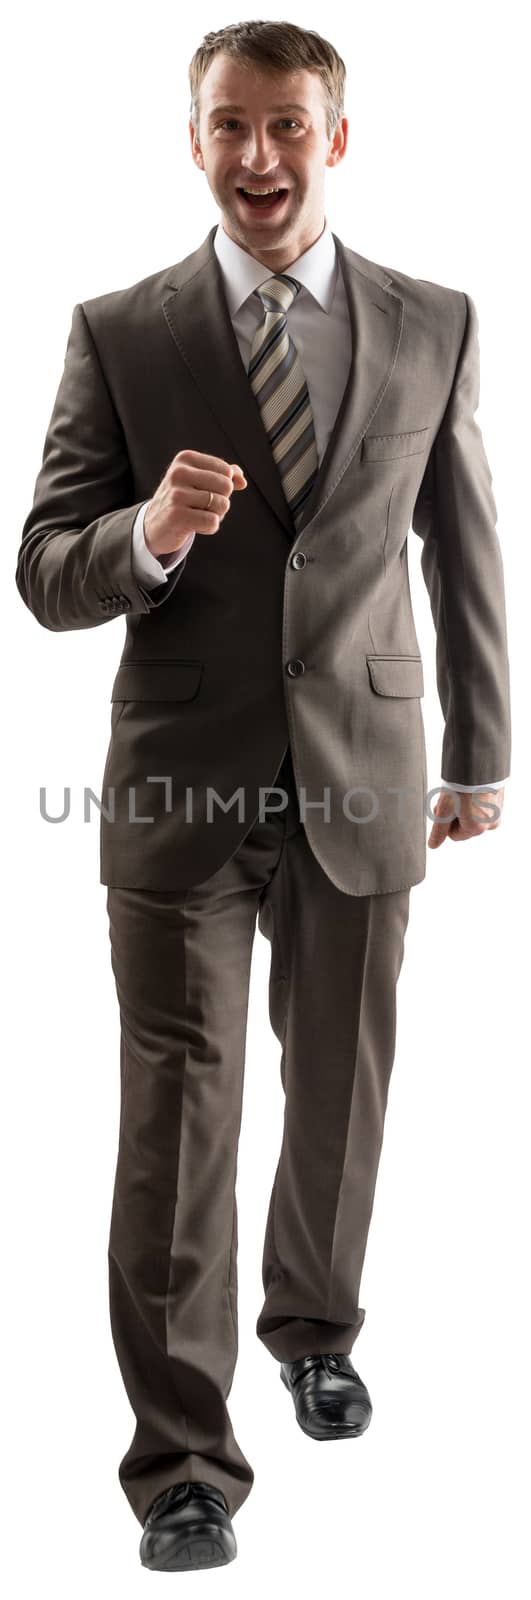 Business man walking and looking at camera isolated on white